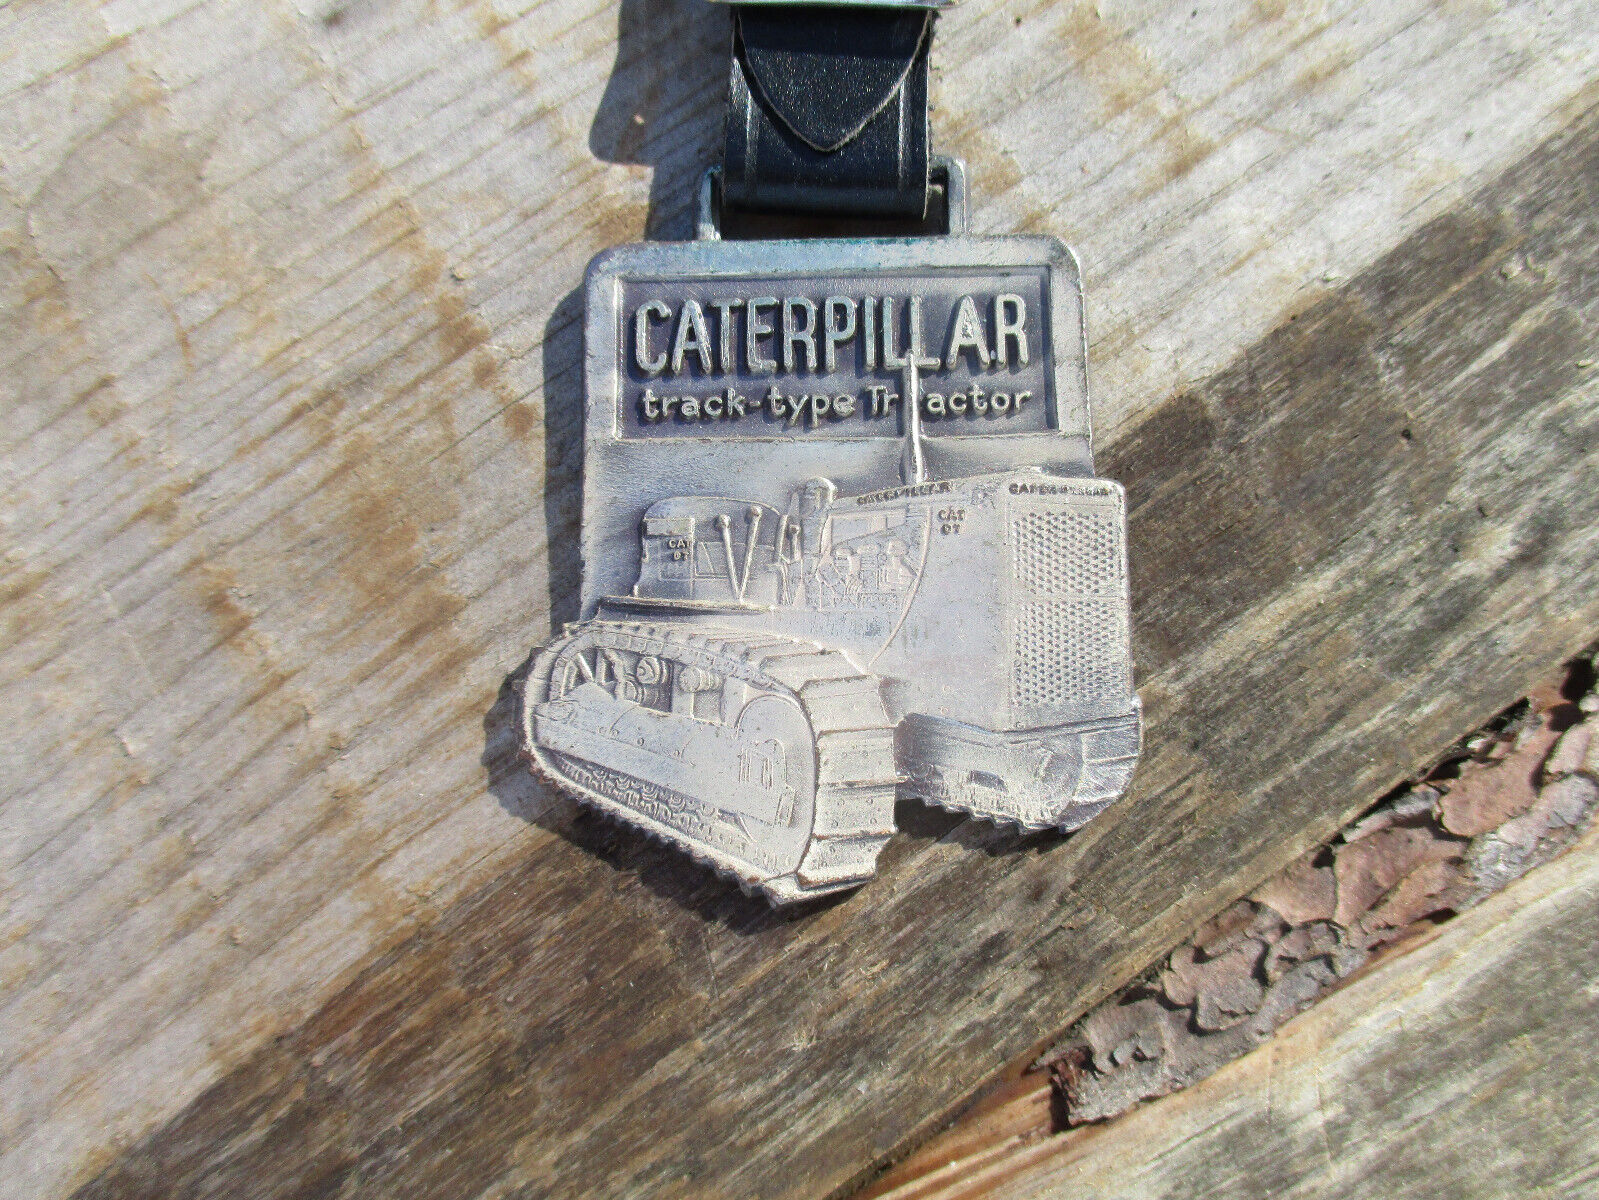 Vintage Caterpillar D7 Watch Fob Track Type Tractor Fabick Service Mo. Ill.